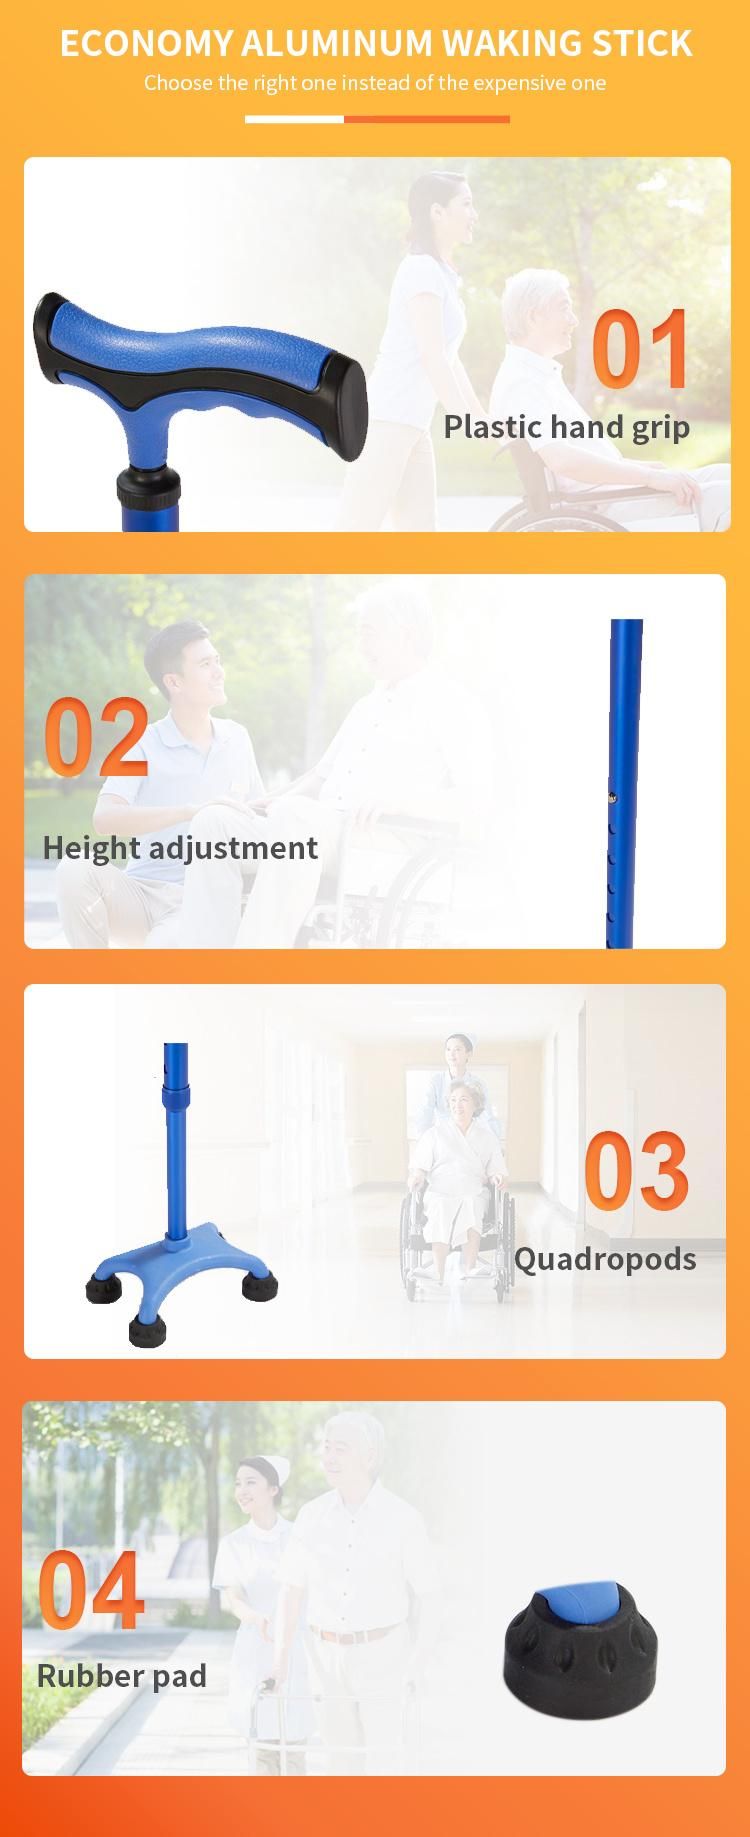 China Professional Manufacture Aluminium Lightweight Elderly Folding Outdoor and Indoor Walking Sticks or Canes